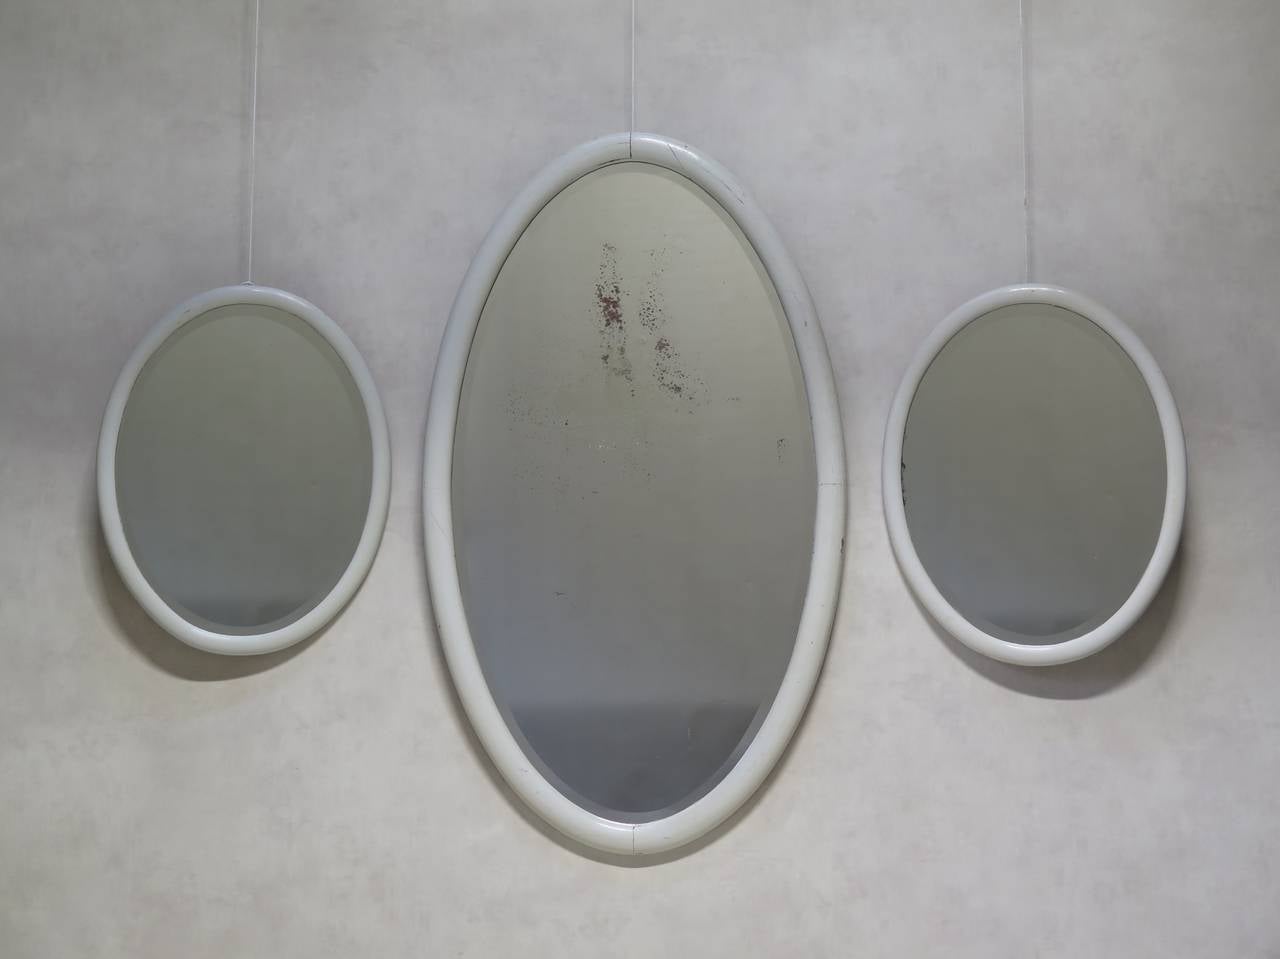 A set of oval mirrors, two smaller ones and one large. The frames are wood, painted glossy white. Original beveled mirrors, with some slight sugaring, especially on the larger one.

Dimensions provided below are for the larger mirror. The small